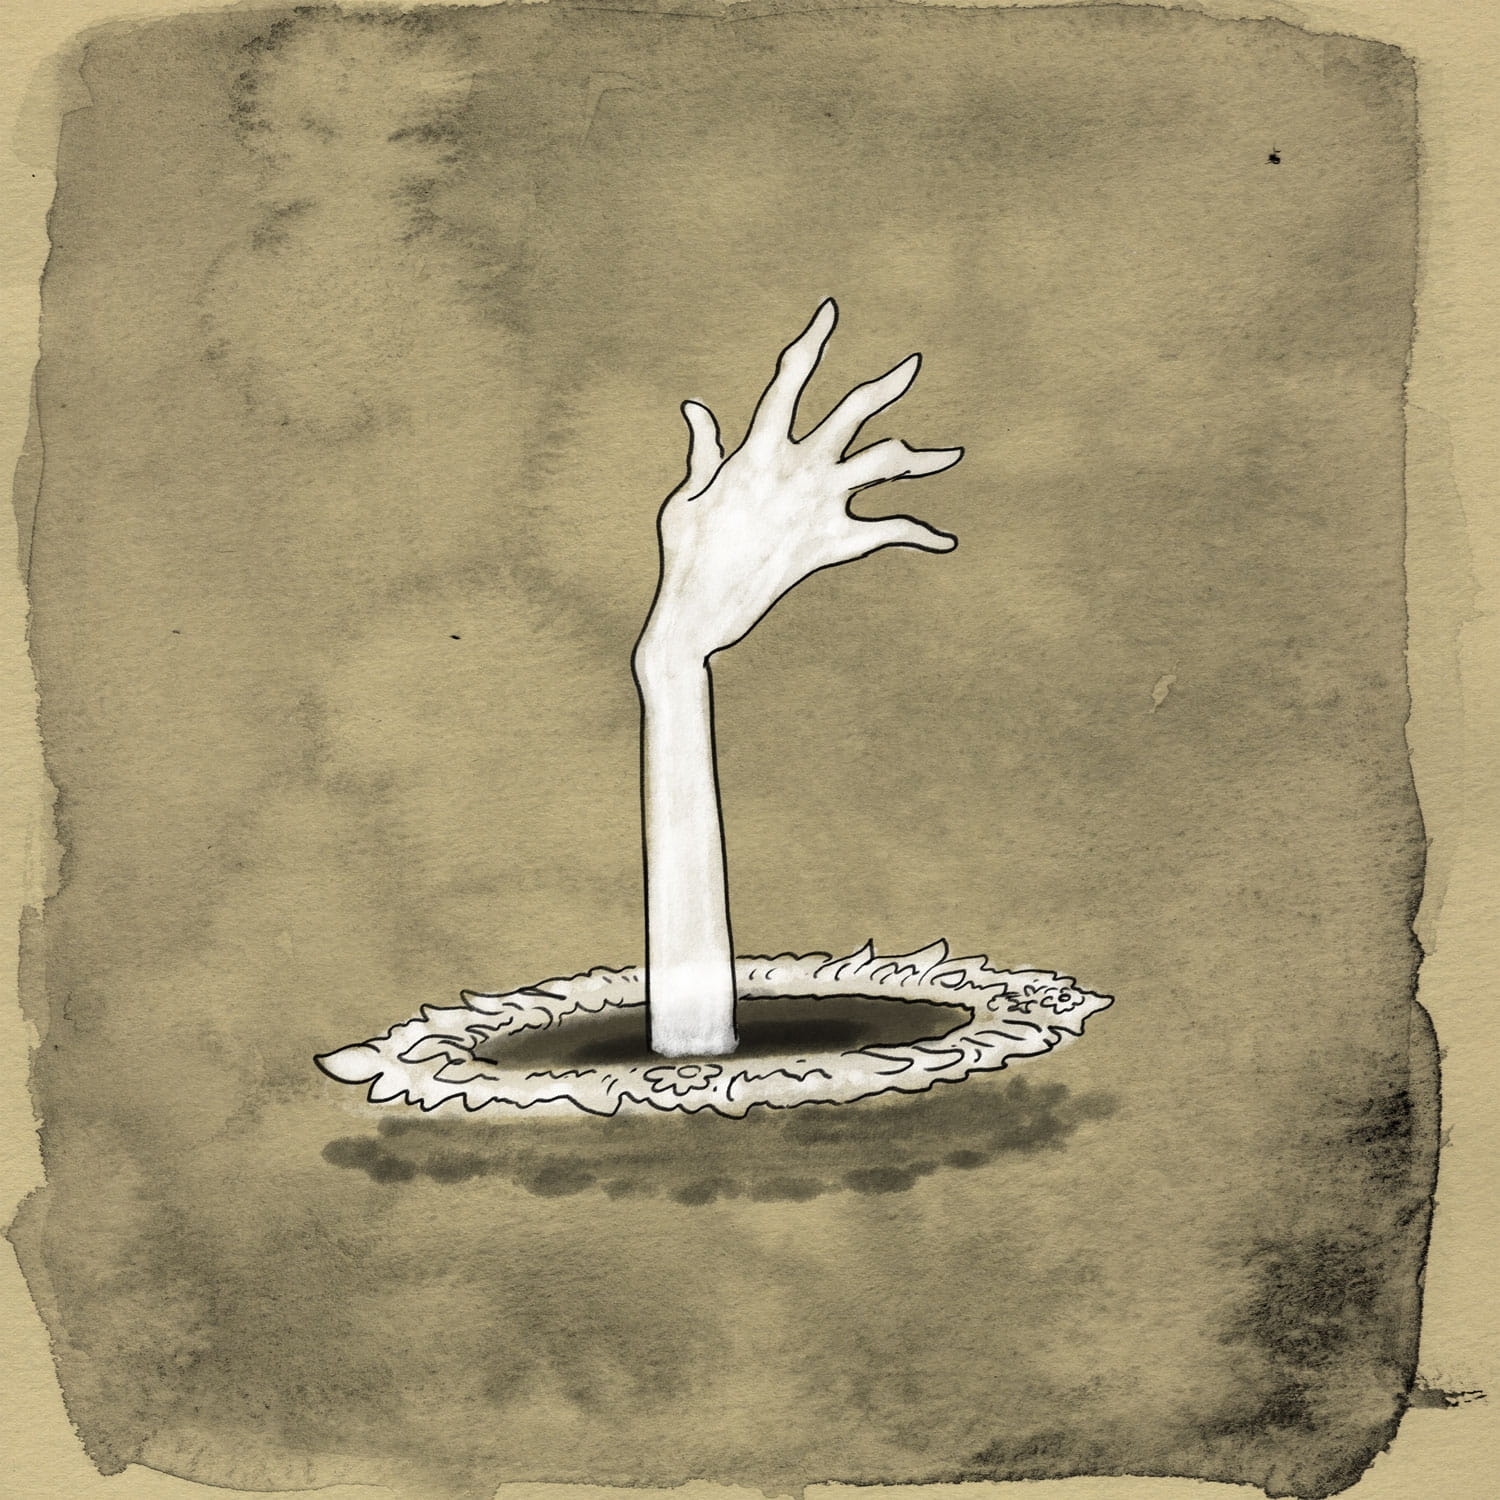 A corpselike hand extending from a hole in the ground.